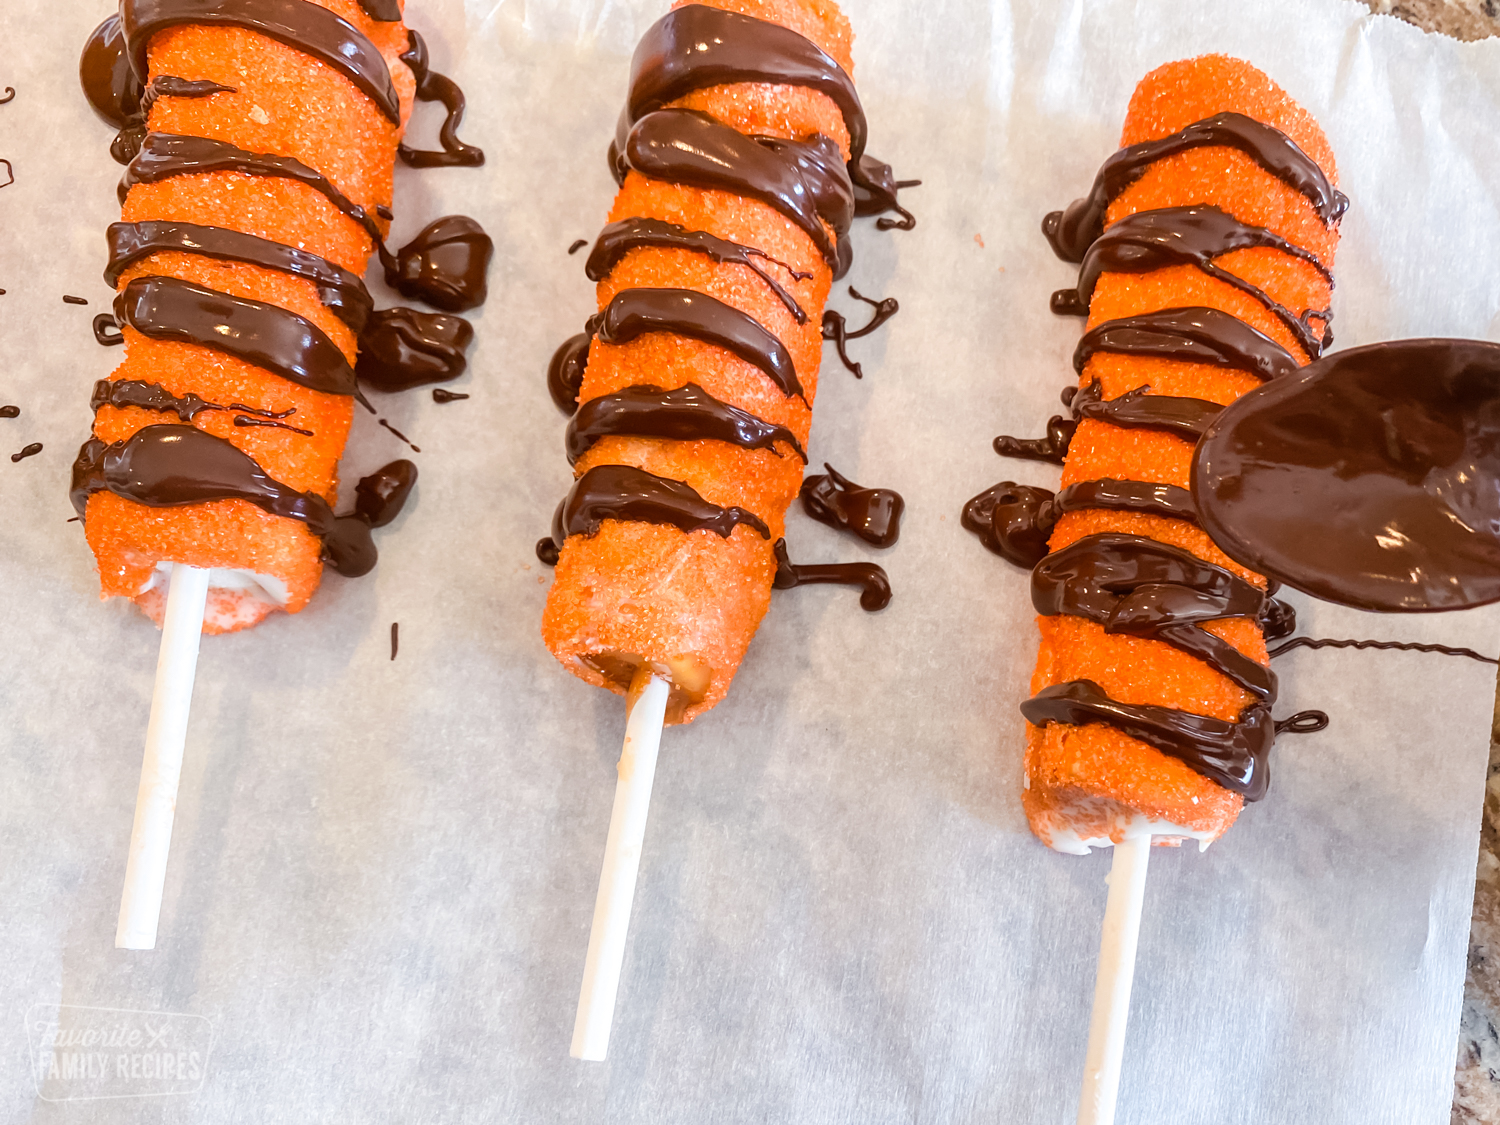 Tigger tails drizzled with chocolate